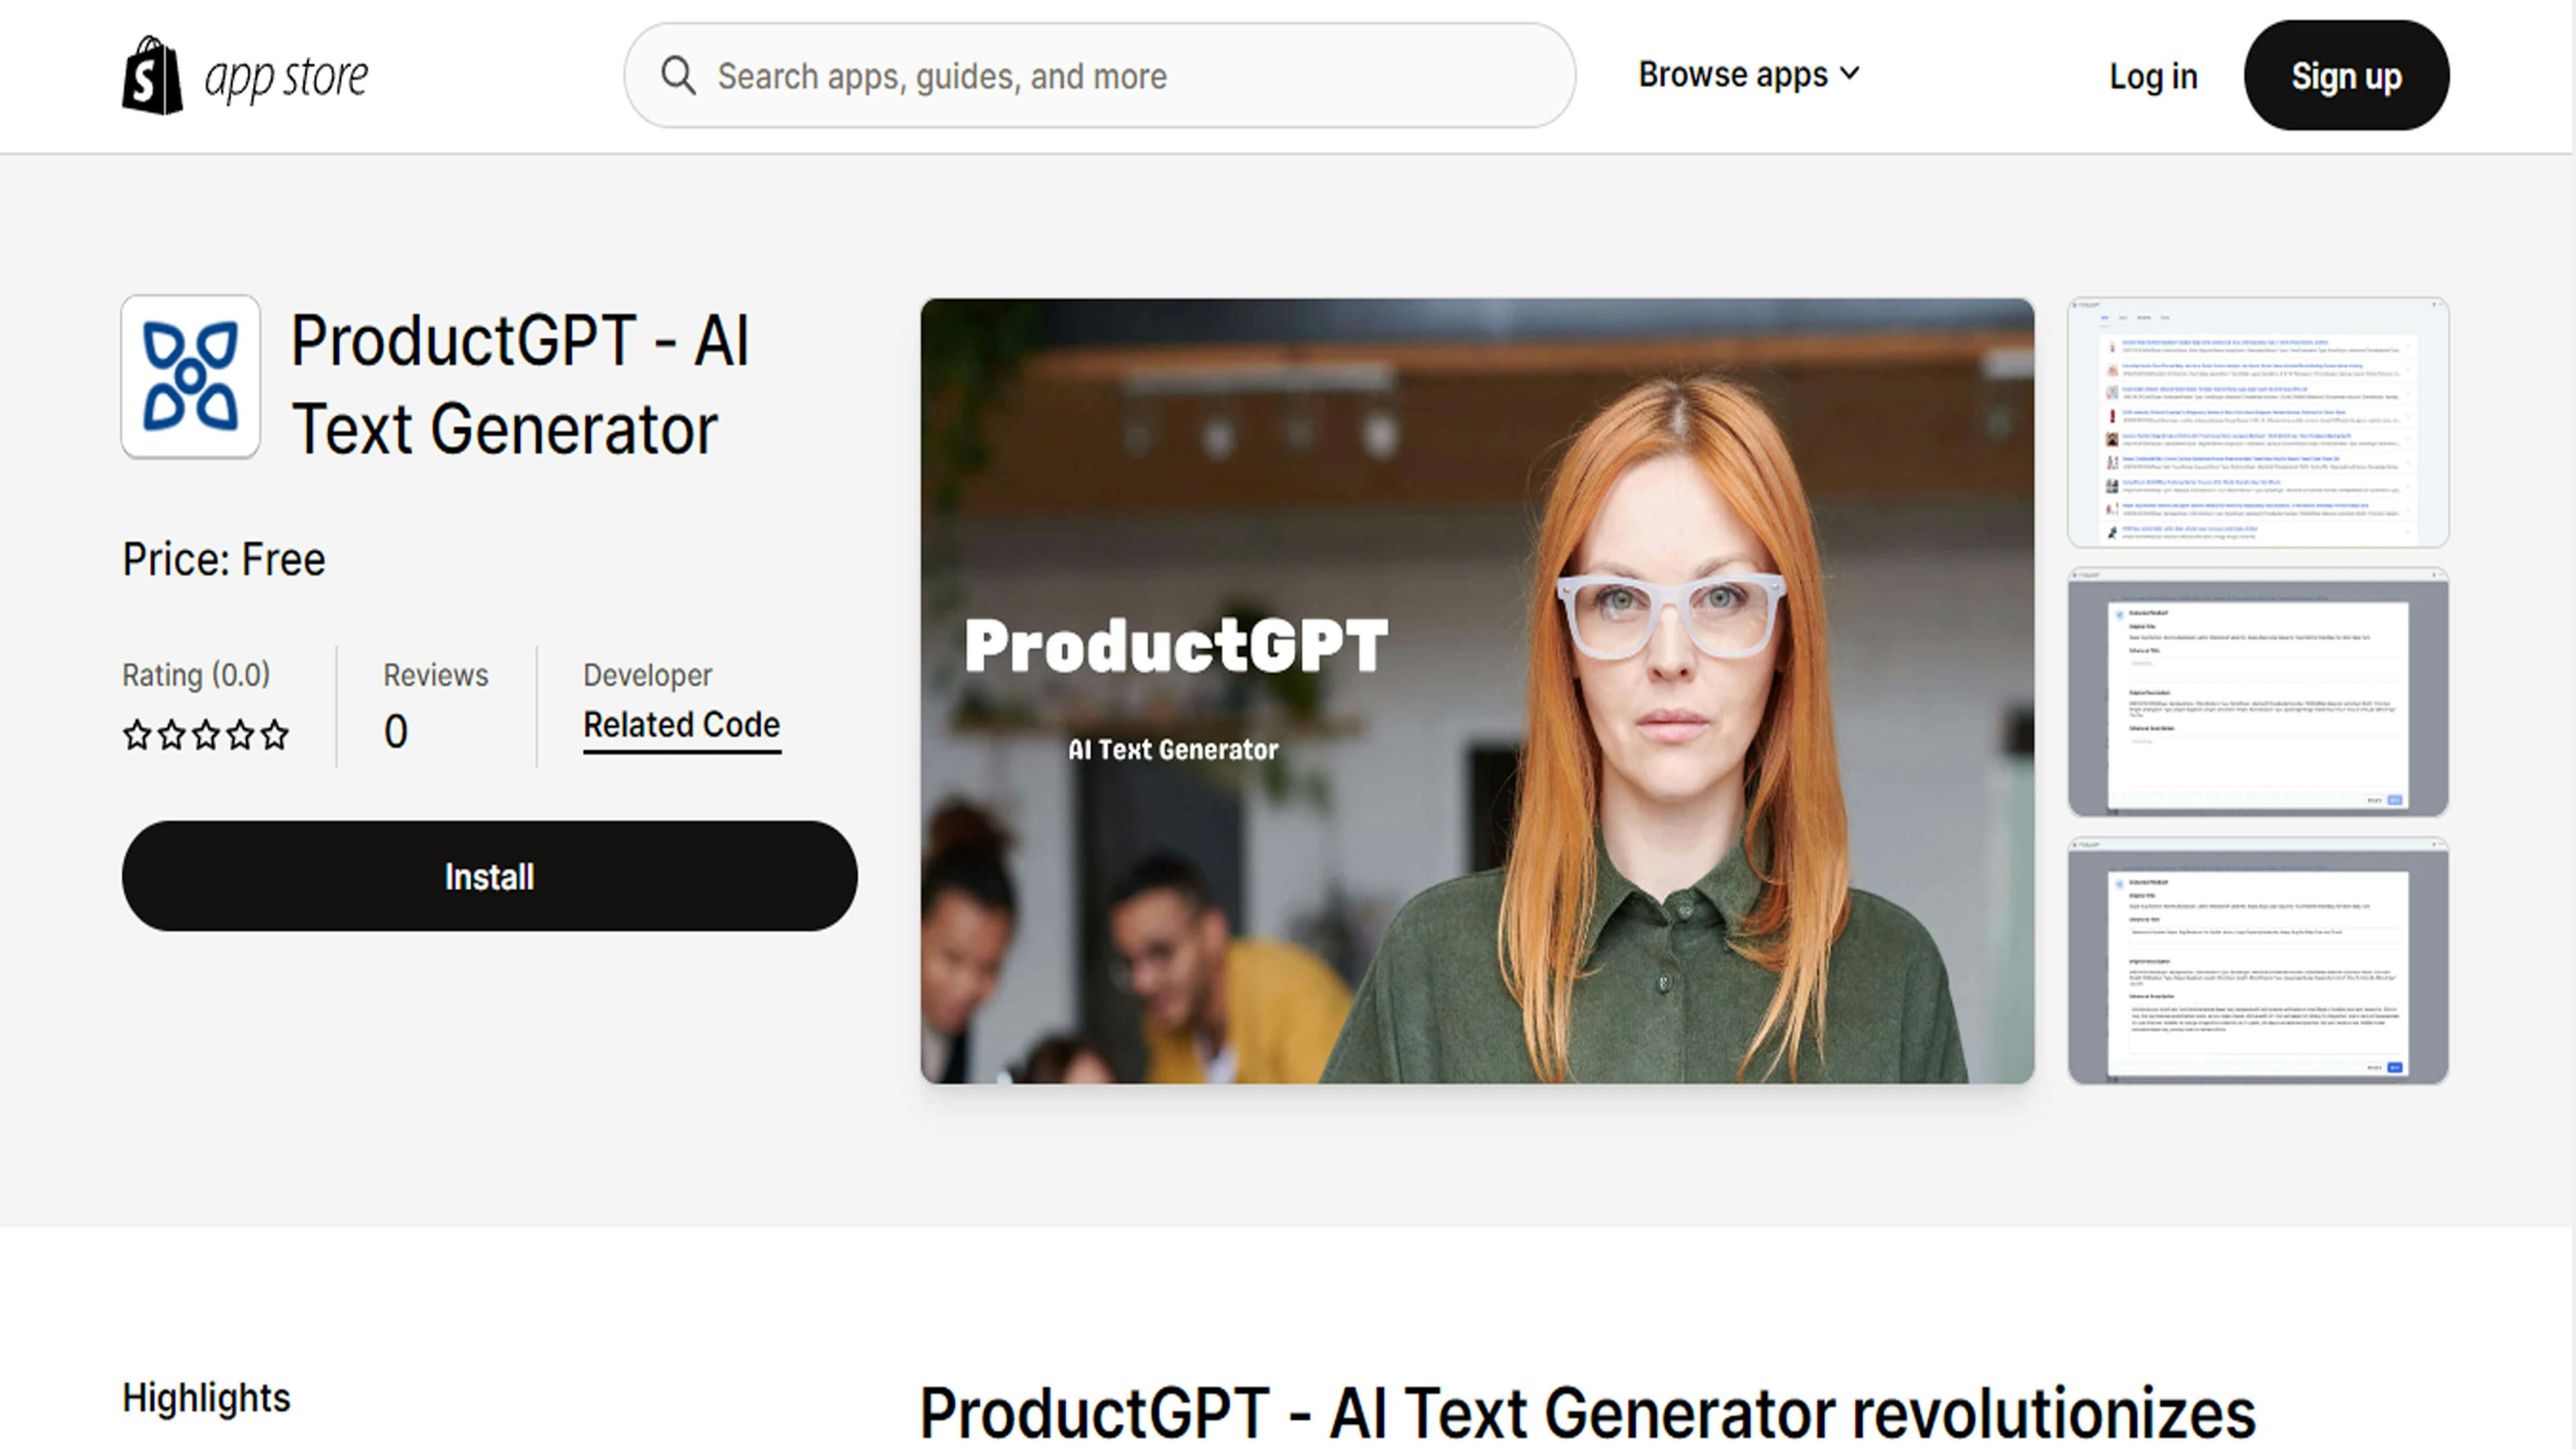 ProductGPT ‑ AI Text Generator